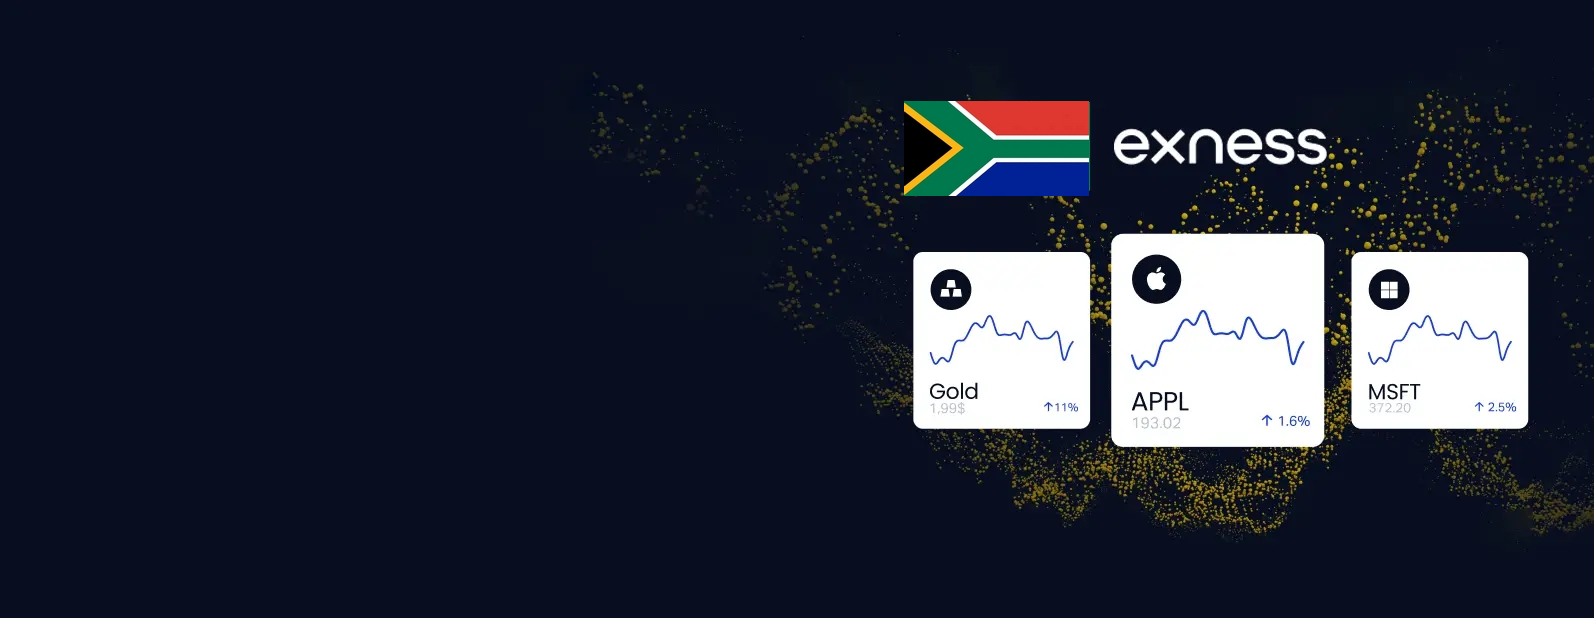 Exness online broker - Forex and Online Trading in South Africa.